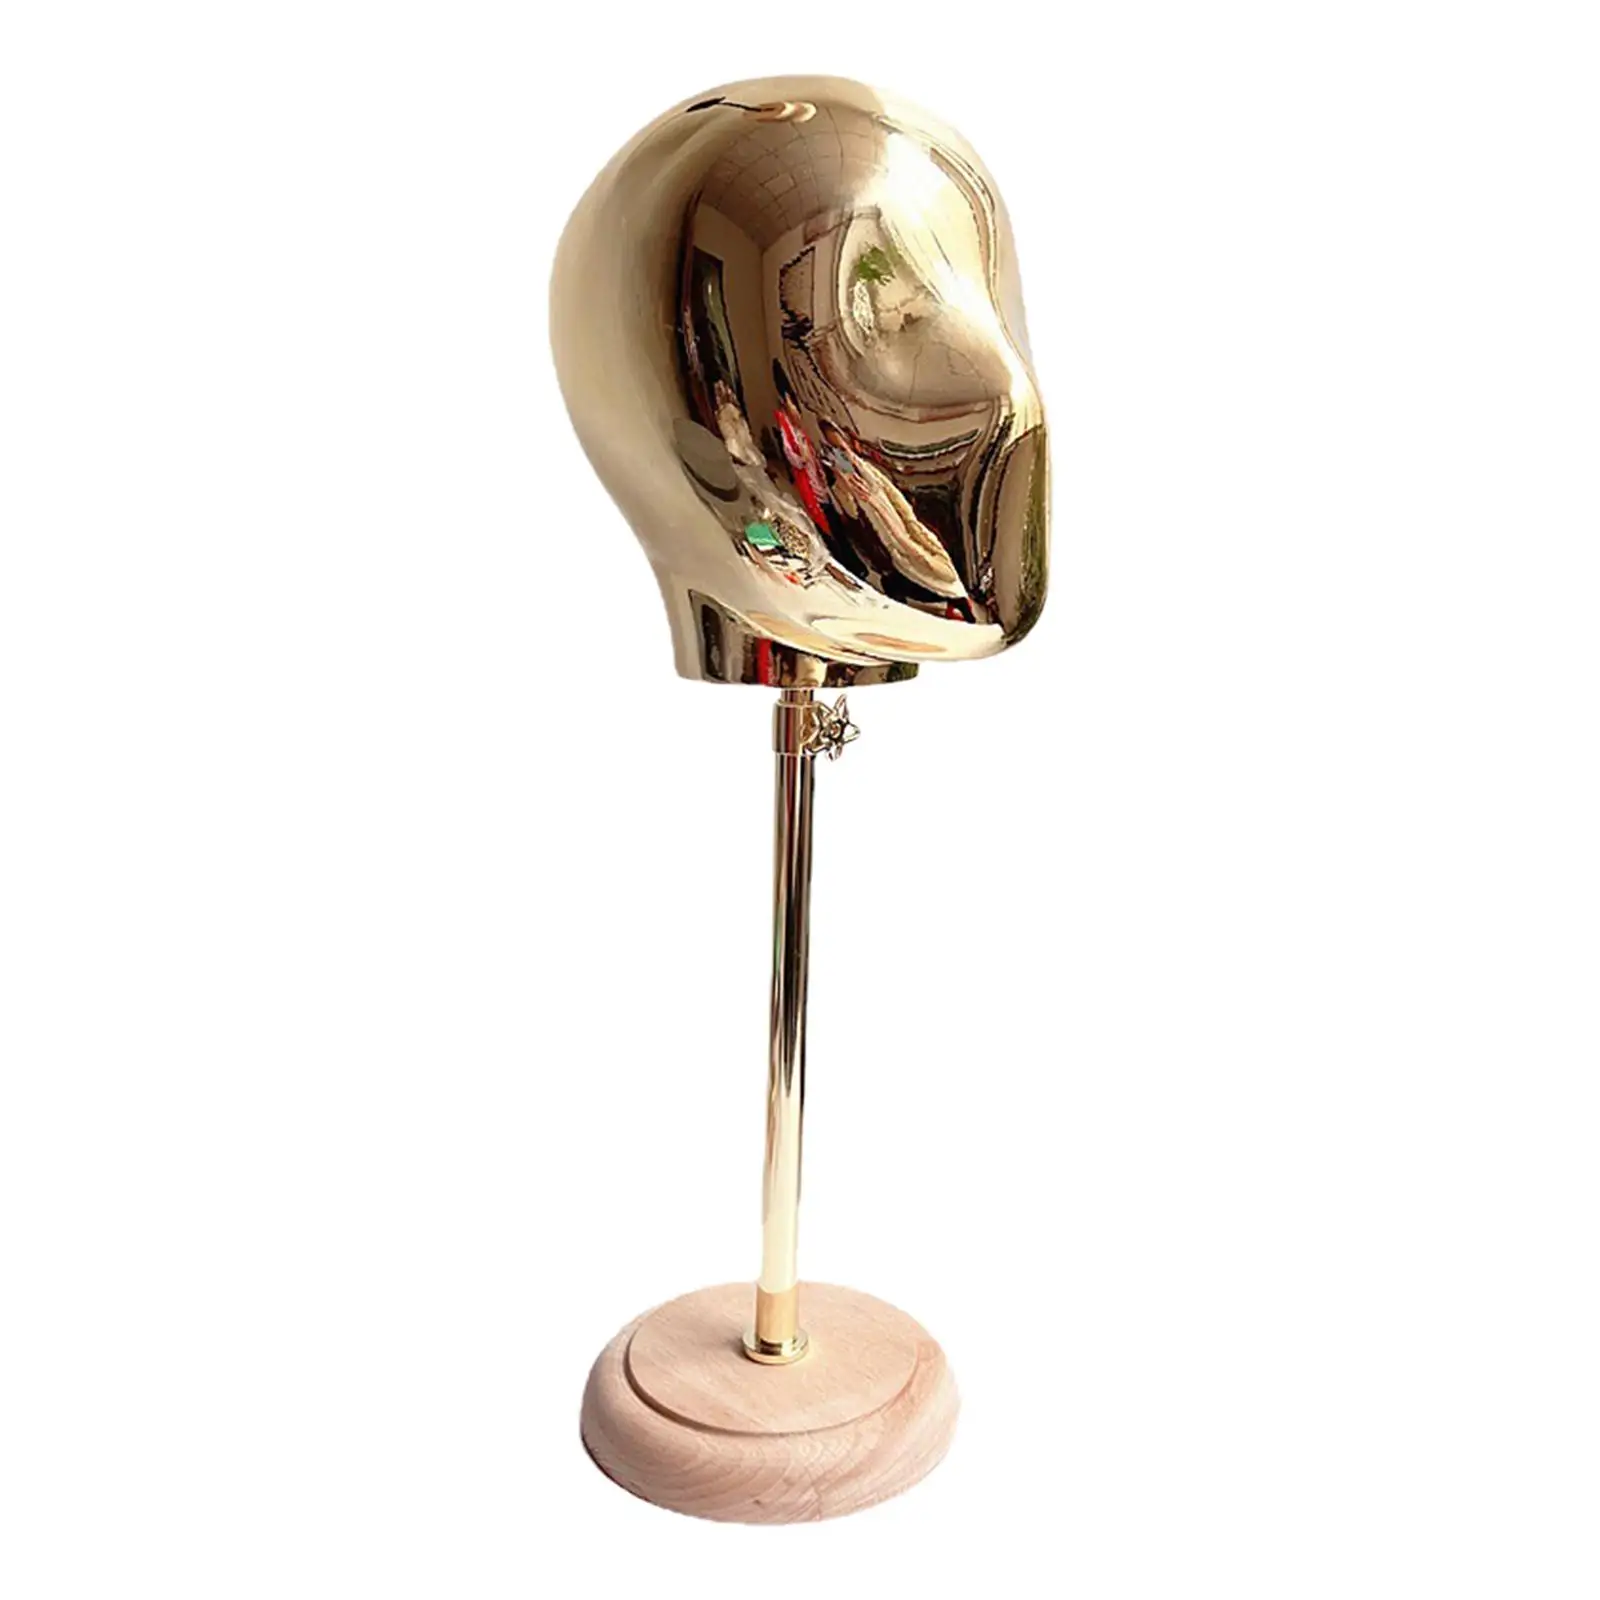 Mannequin Styling Head Wig Making Hat Display Stand Aureate Lightweight Total 19-27.5inch Tall Multifunctional Round Wood Base